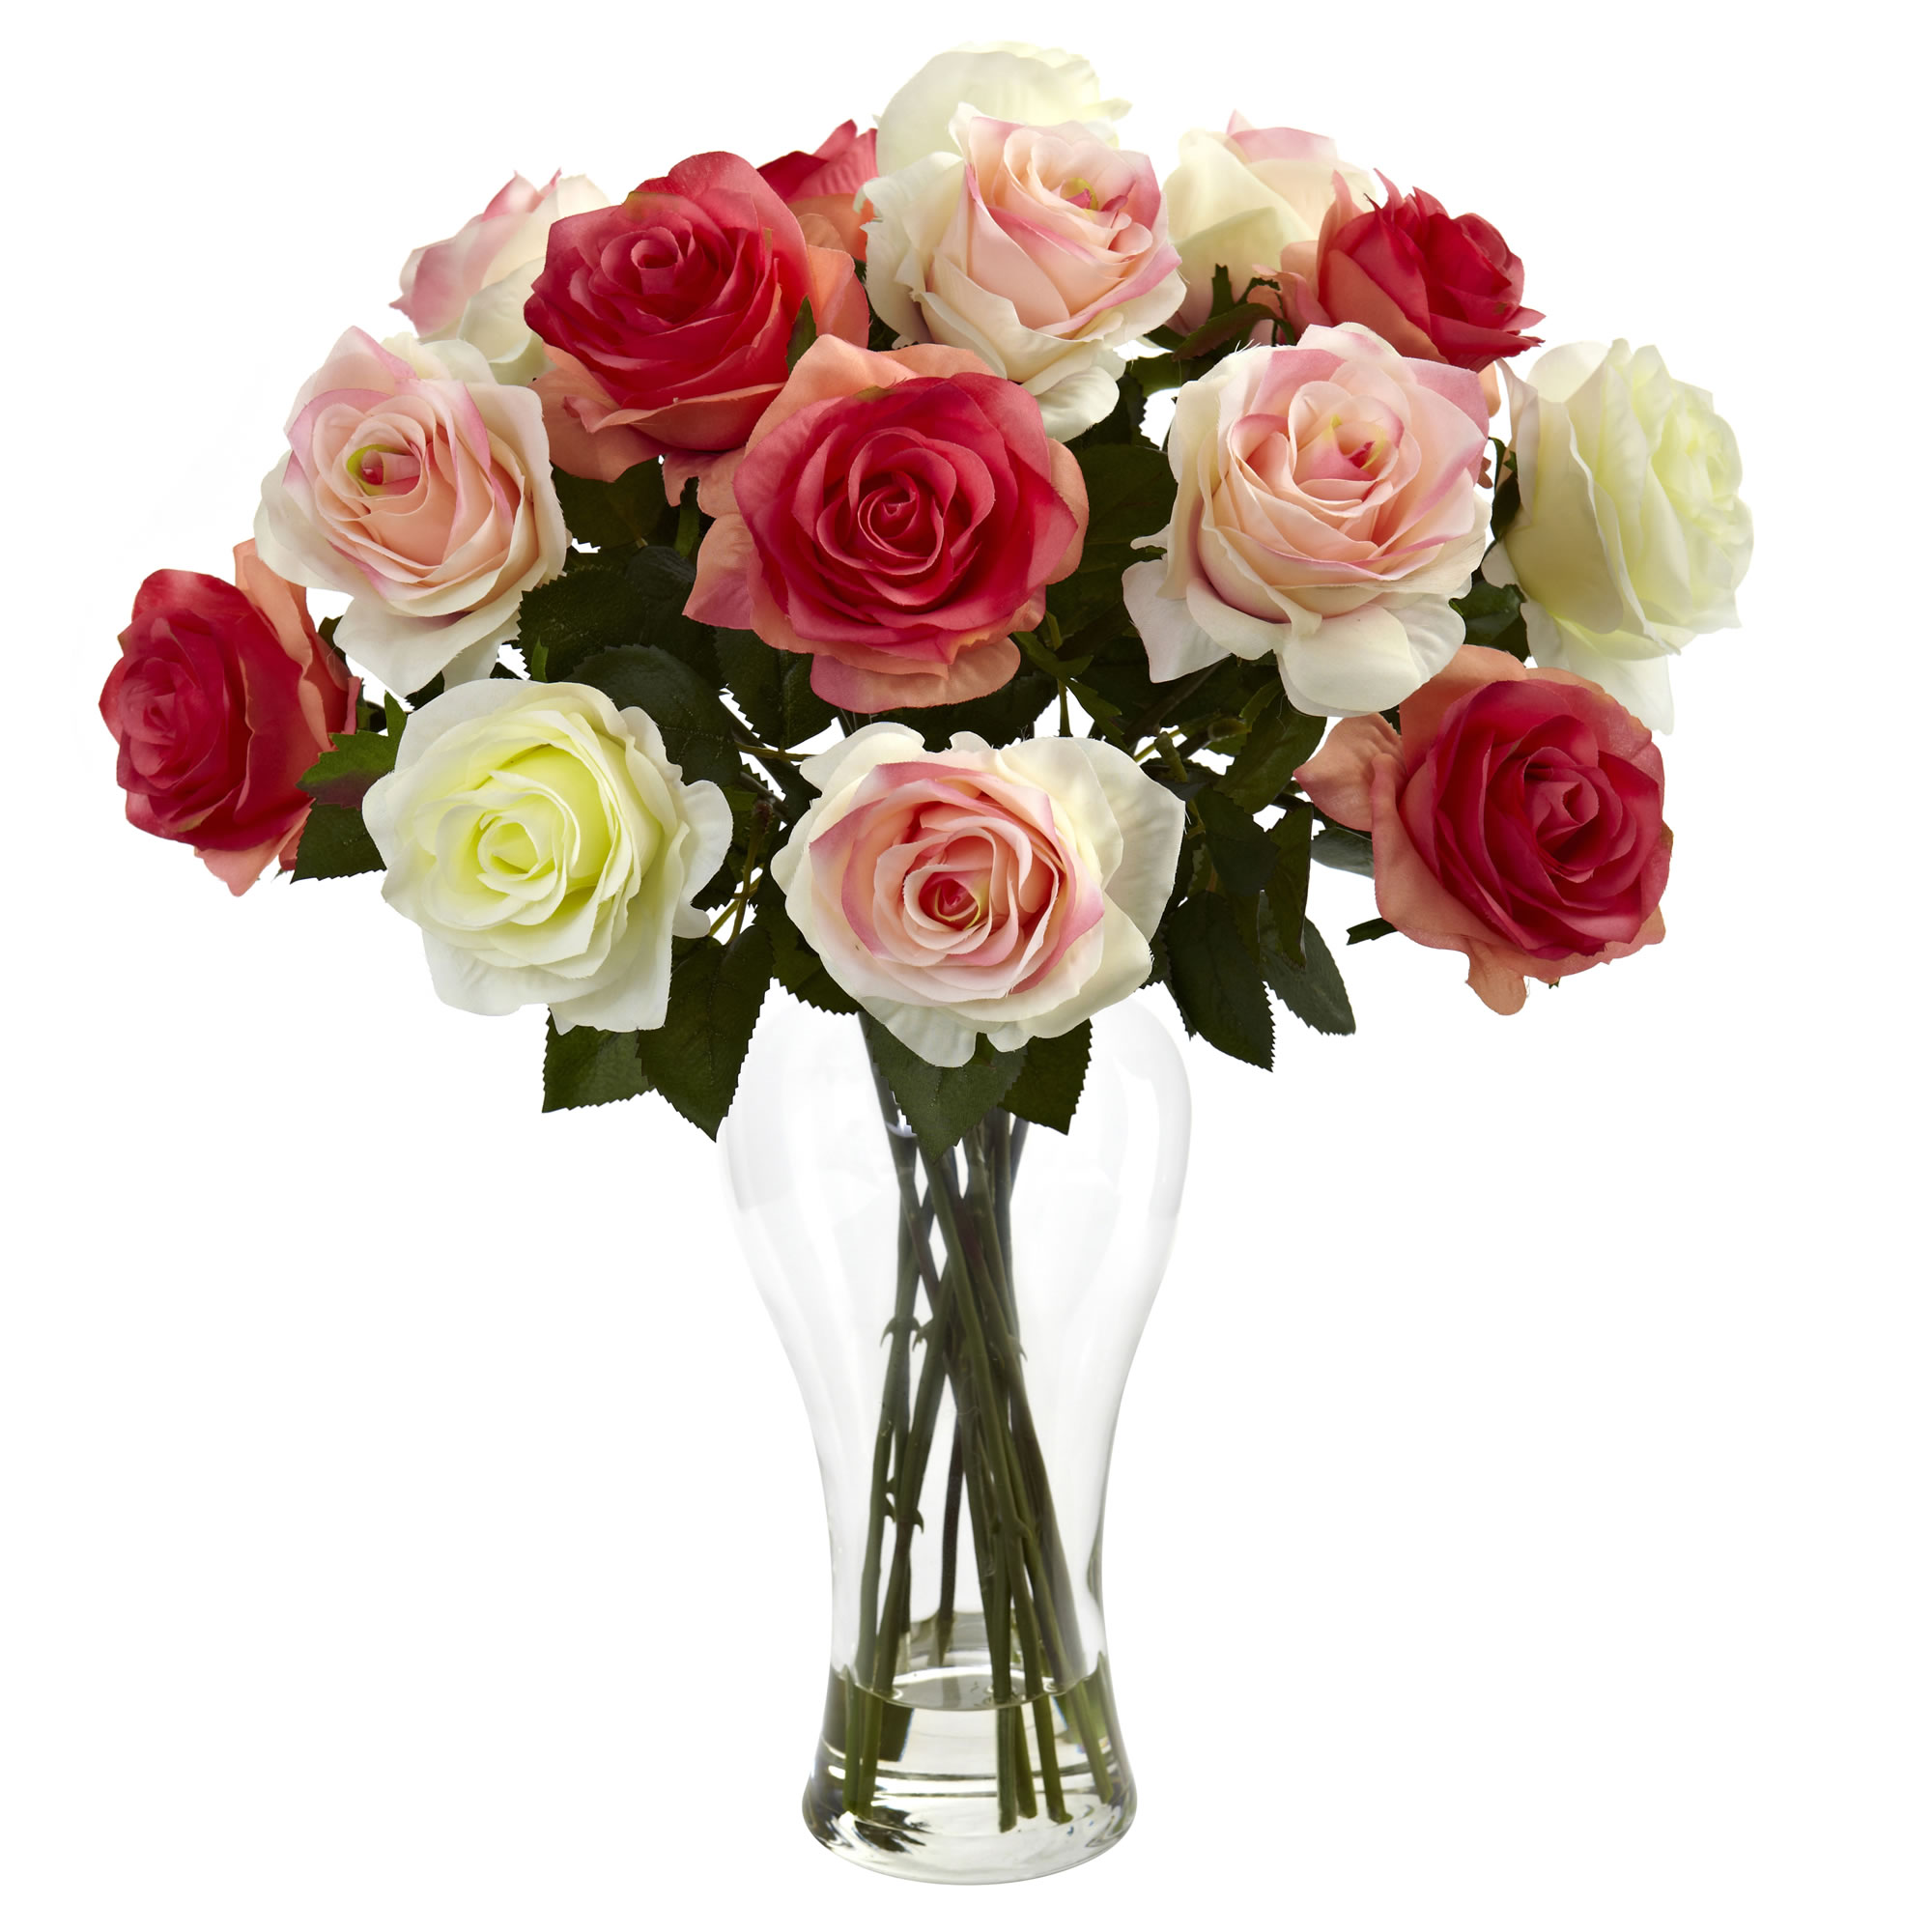 18 Inch Silk Assorted Blooming Roses In Vase